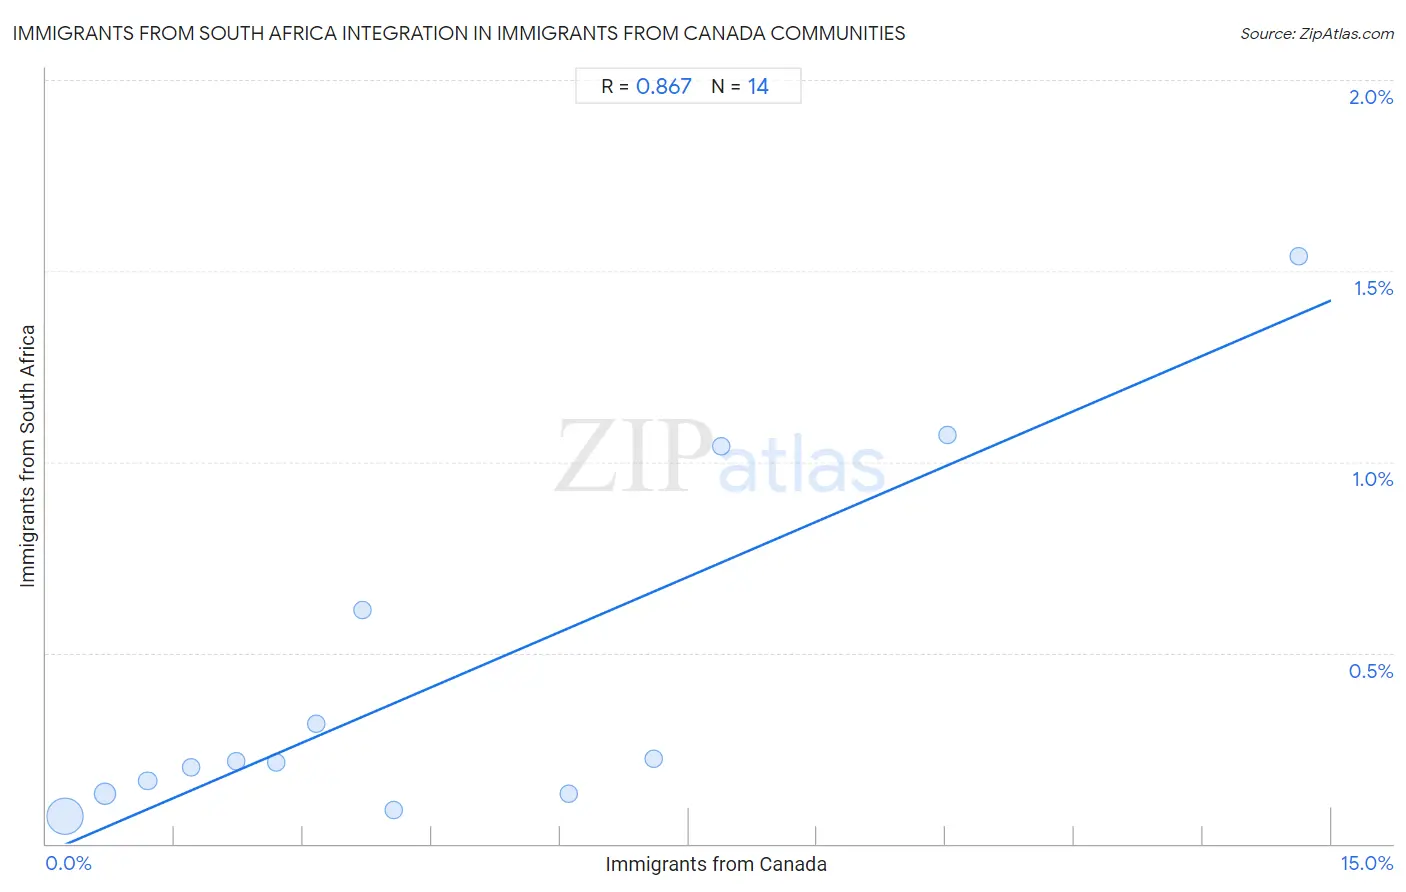 Immigrants from Canada Integration in Immigrants from South Africa Communities